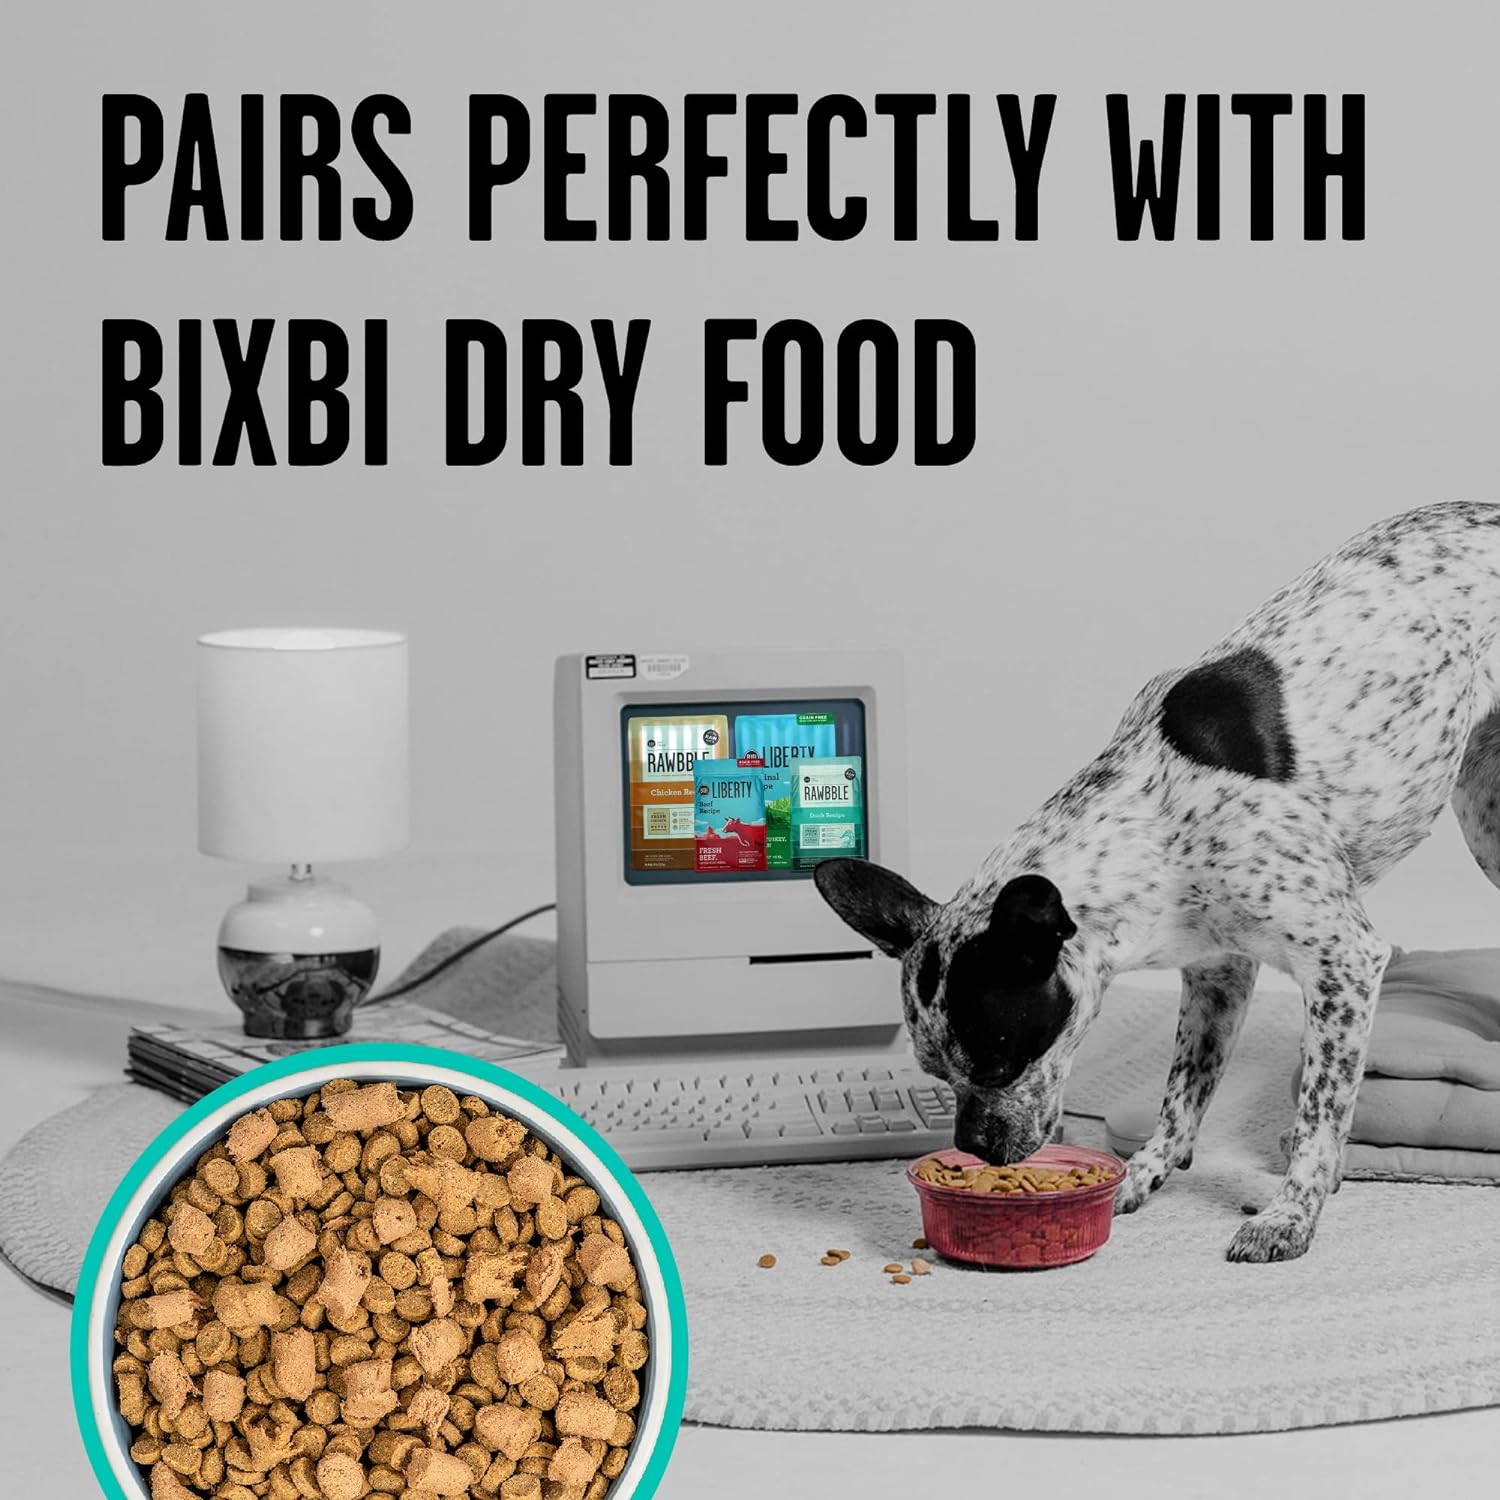 BIXBI Rawbble Freeze Dried Dog Food, Duck Recipe, 4.5 oz - 95% Meat and Organs, No Fillers - Pantry-Friendly Raw Dog Food for Meal, Treat or Food Topper - USA Made in Small Batches : Pet Supplies